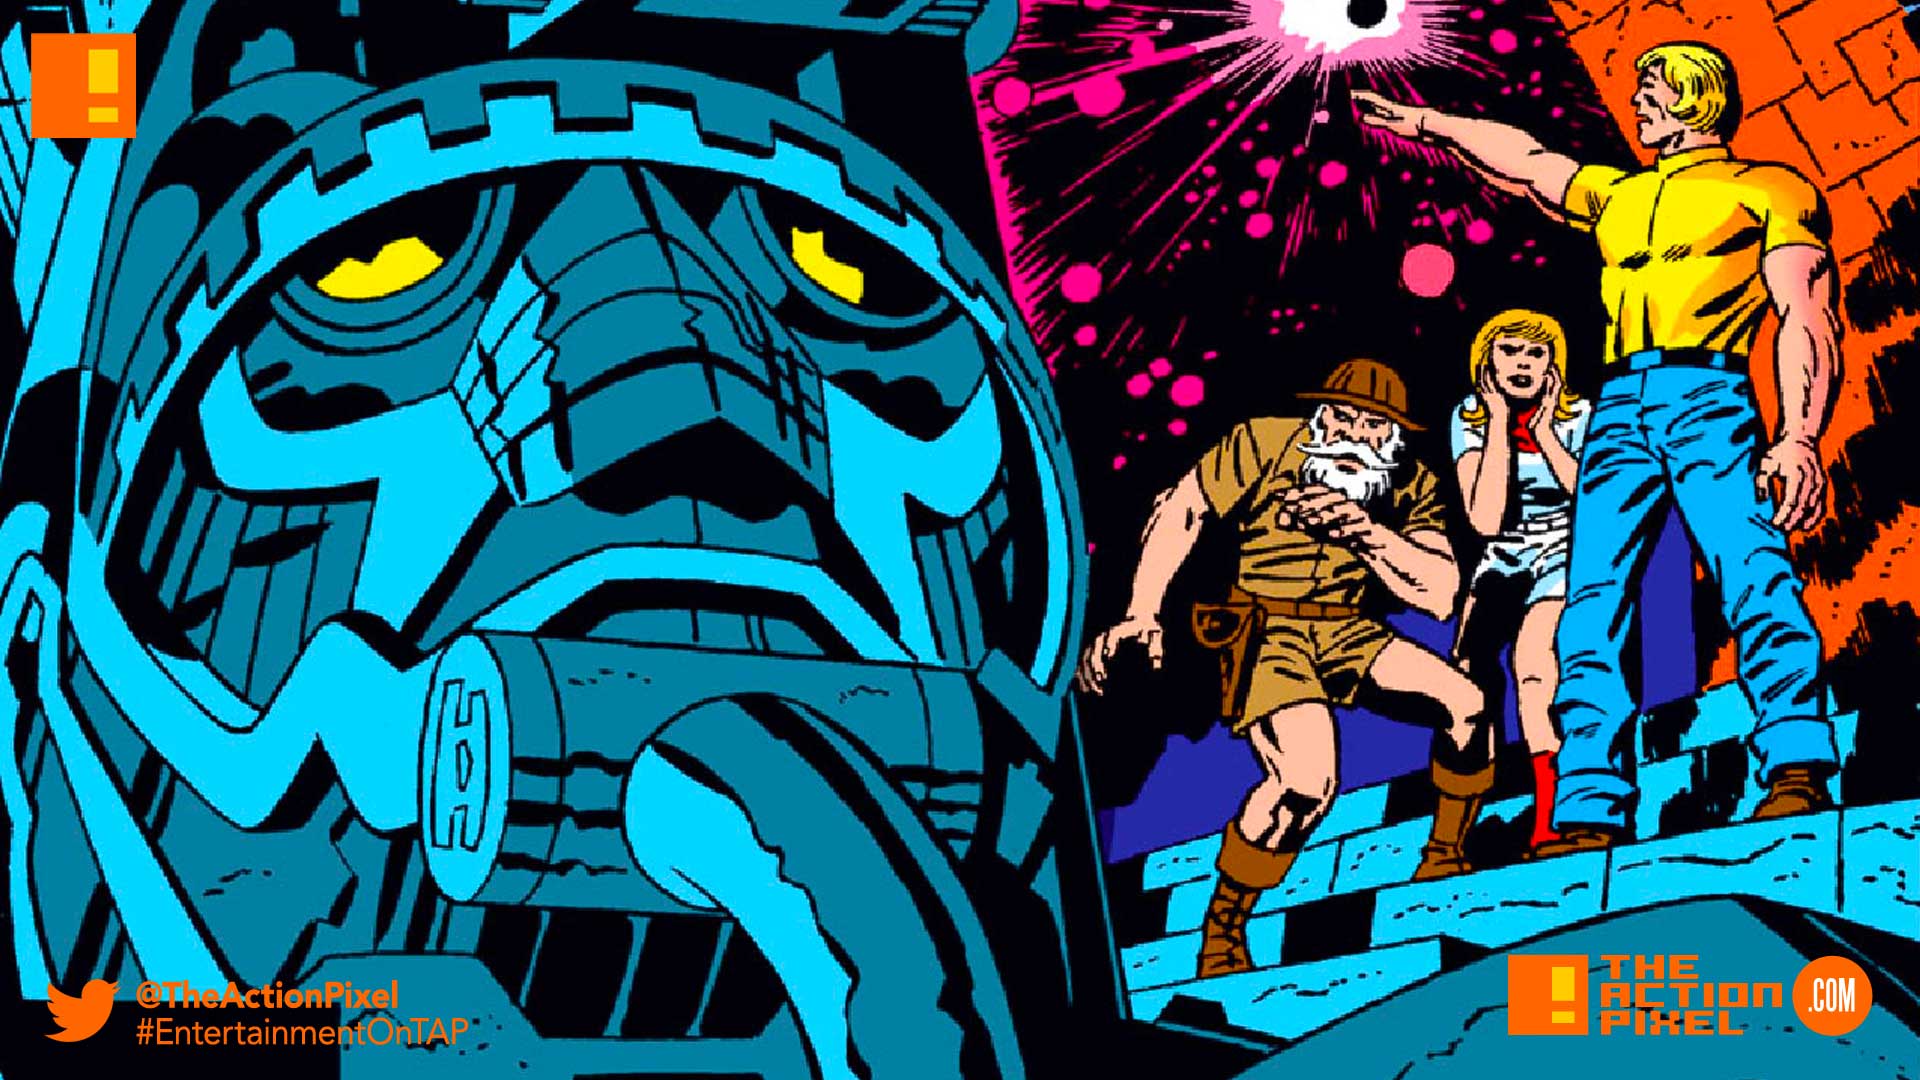 Marvel attaches director to their coming MCU movie “The Eternals”